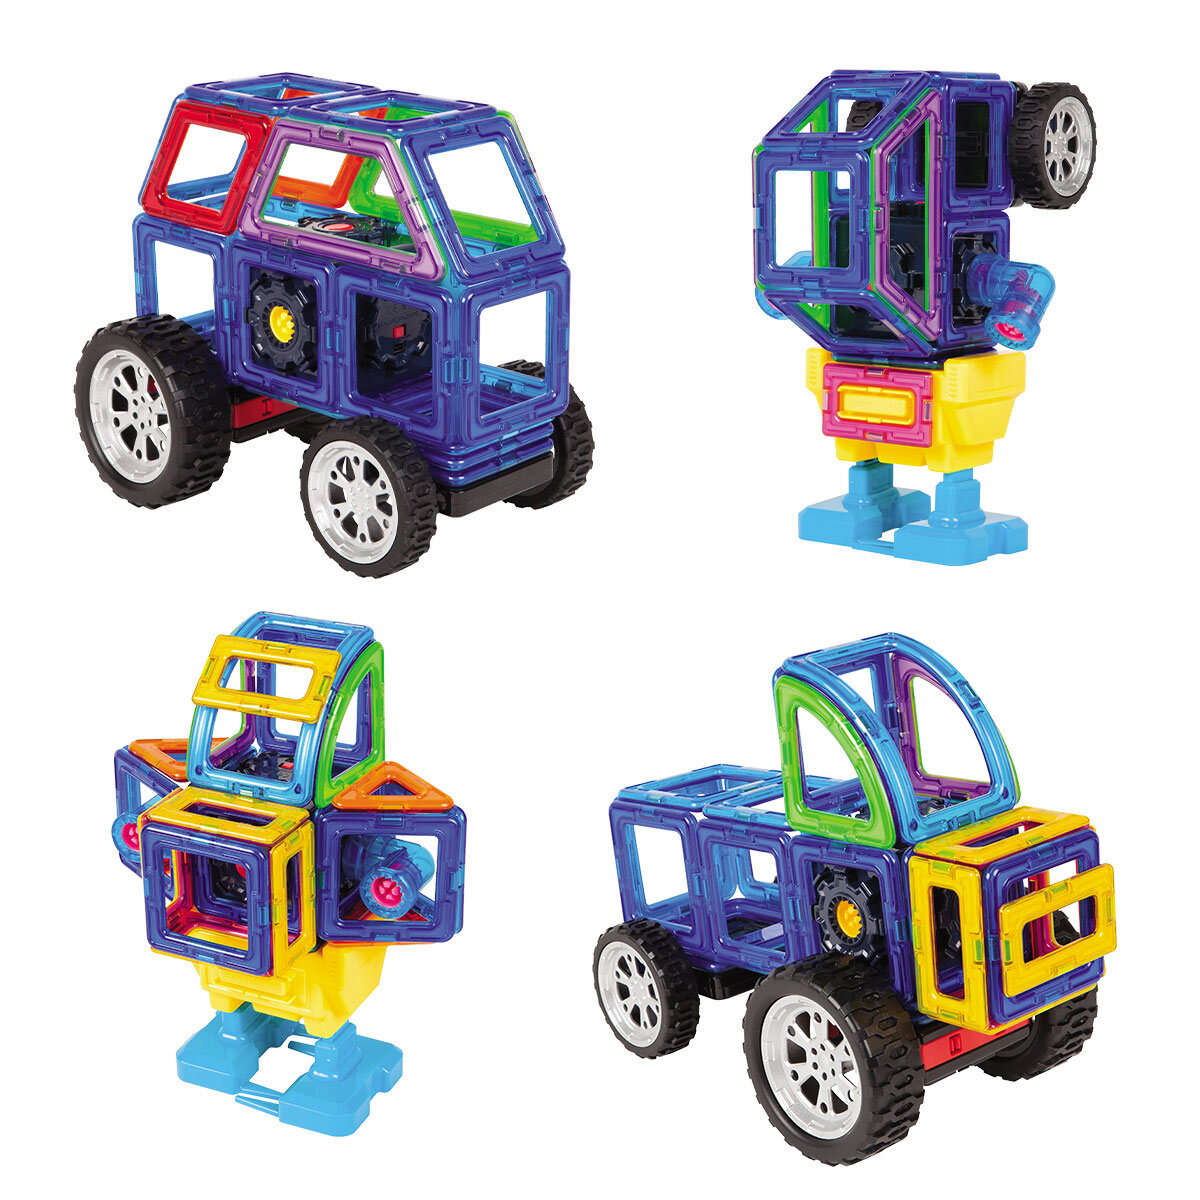 Buy Magformers Walking Robot Car Set Combined Feature3 Image at Costco.co.uk